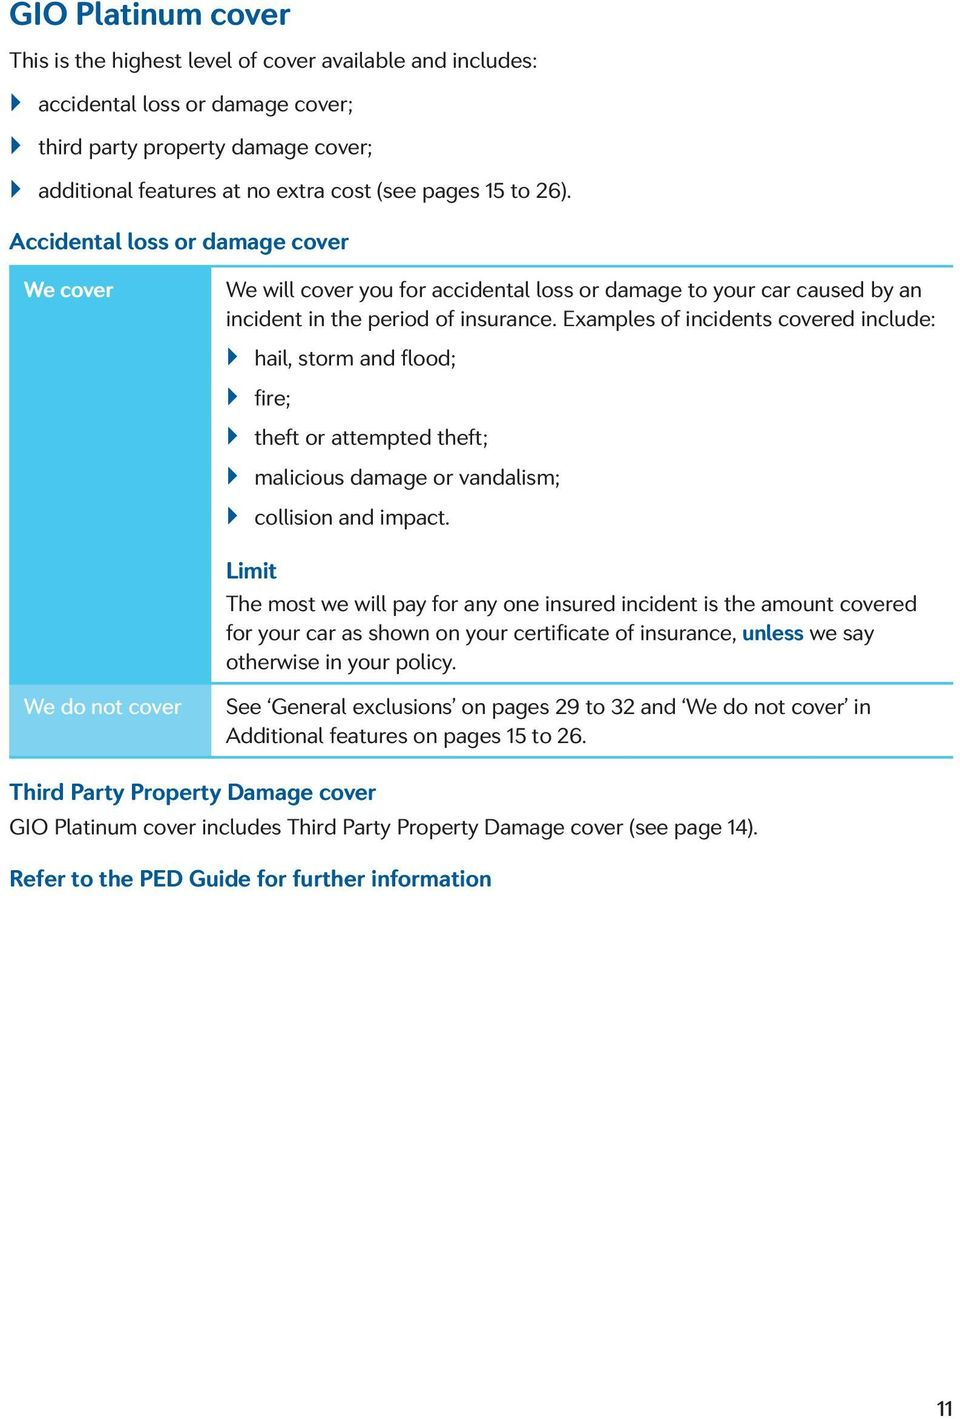 Car Insurance Product Disclosure Statement Pdf Free Download intended for proportions 960 X 1419